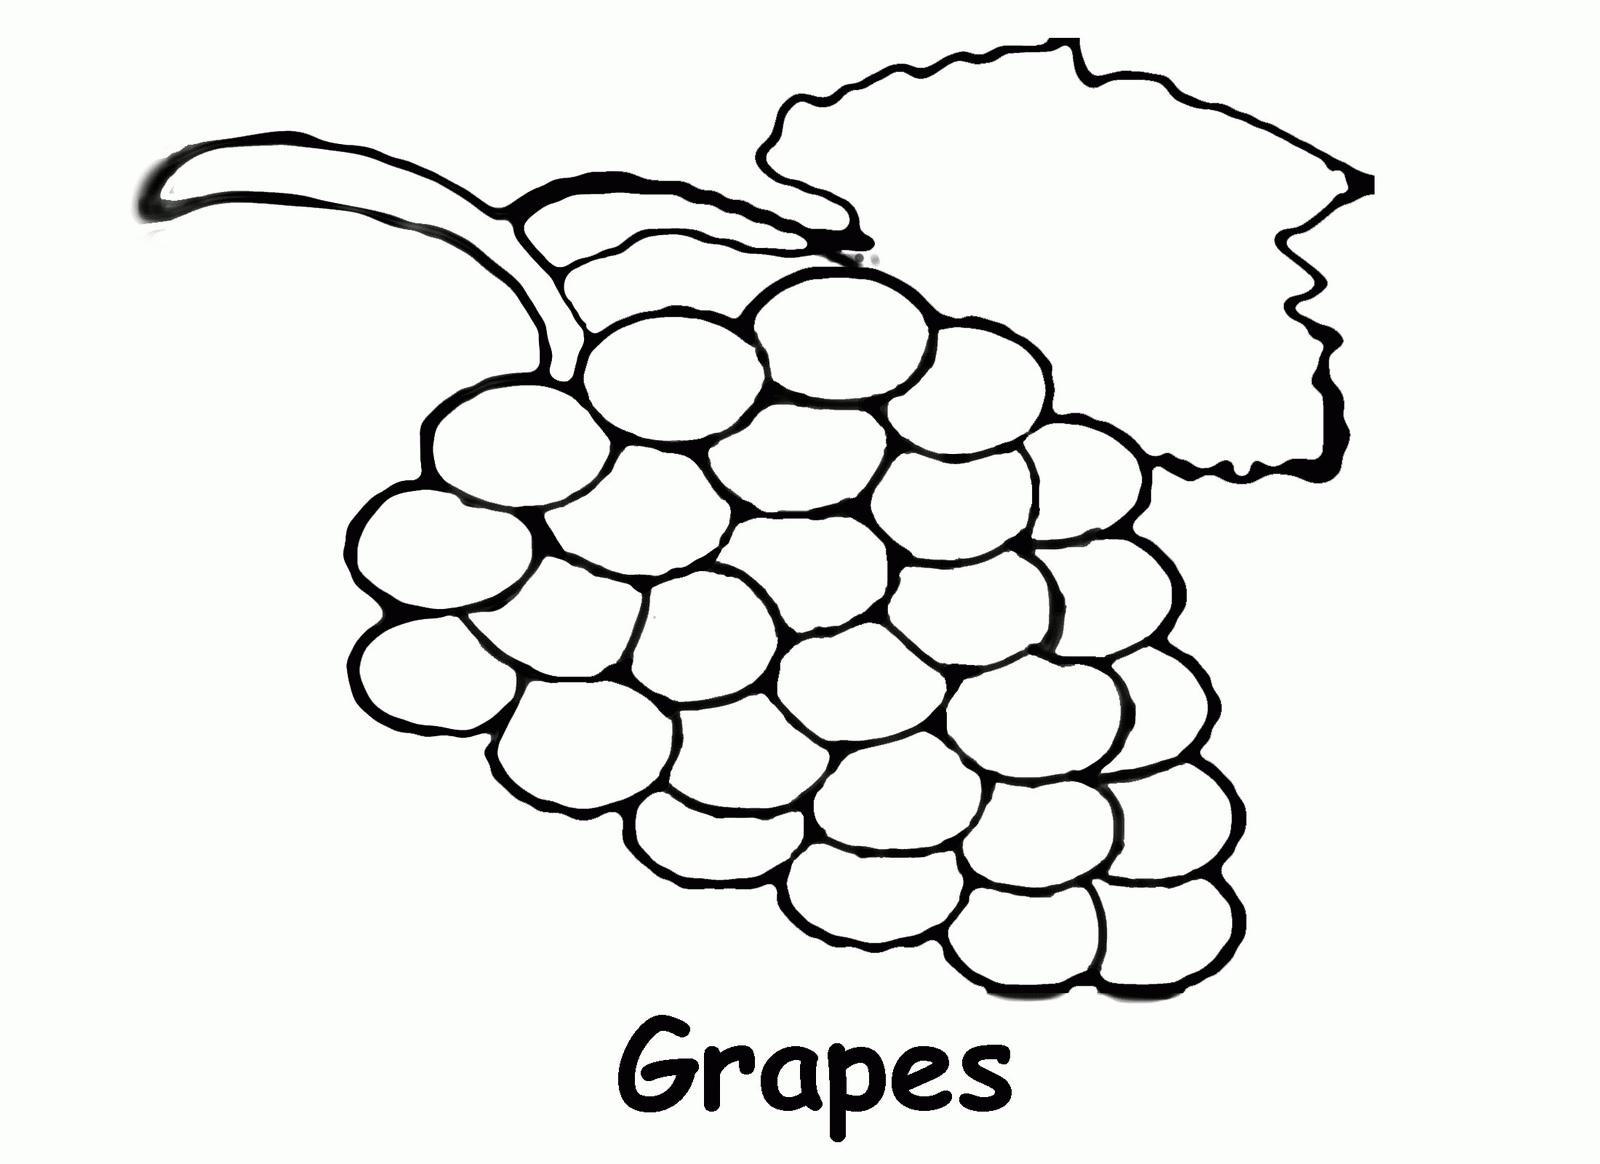 Kindergarten Free Bunch Of Grapes Coloring Pages - Widetheme